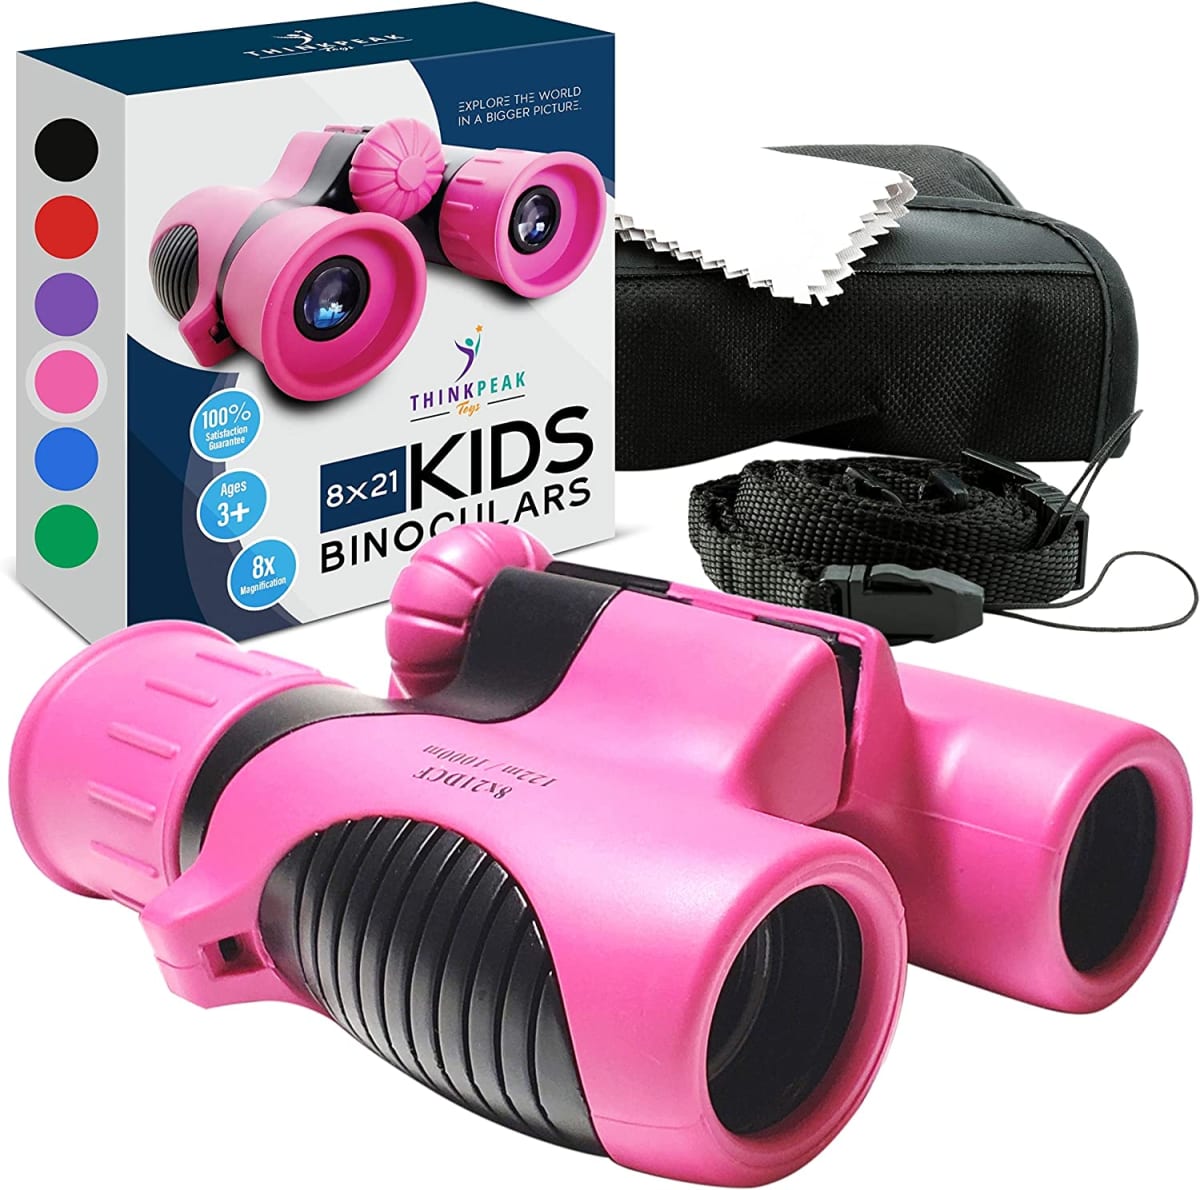 Binoculars for Kids - High Resolution, Shock-Resistant Real Toy Binoculars for 3-12 Girls and Boys - Holiday Gifts & Stocking Stuffers for Kids, Pink